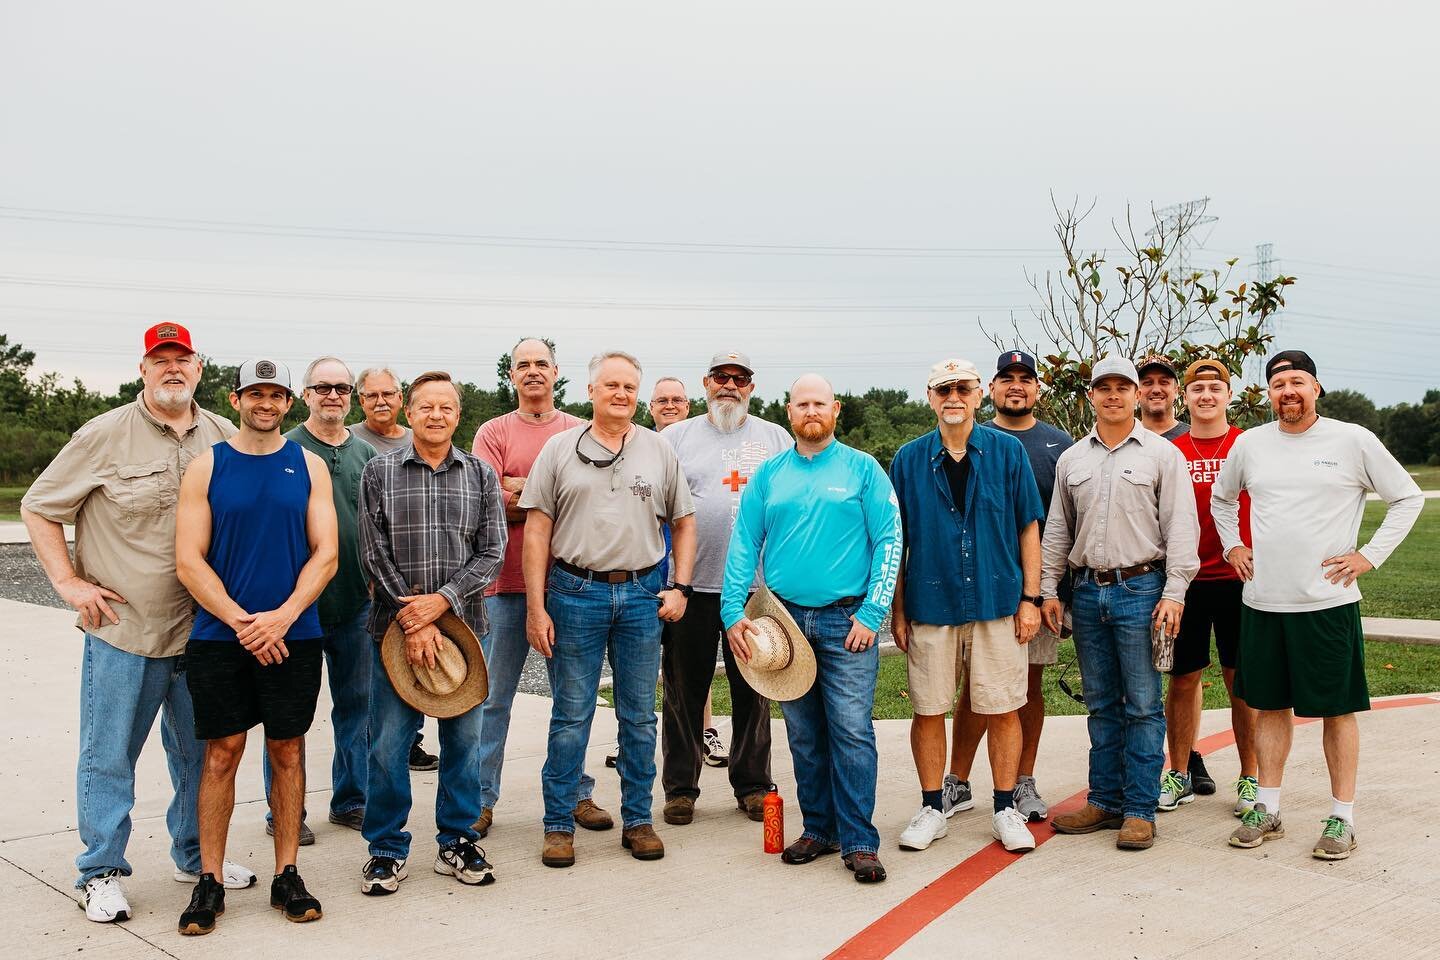 The Redeemer Men spent a Saturday morning helping keep our campus looking sharp. Thanks guys!

Our next Redeemer Men's fellowship event is a kickball &amp; BBQ night taking place on Friday, June 16th. Mark your calendars!